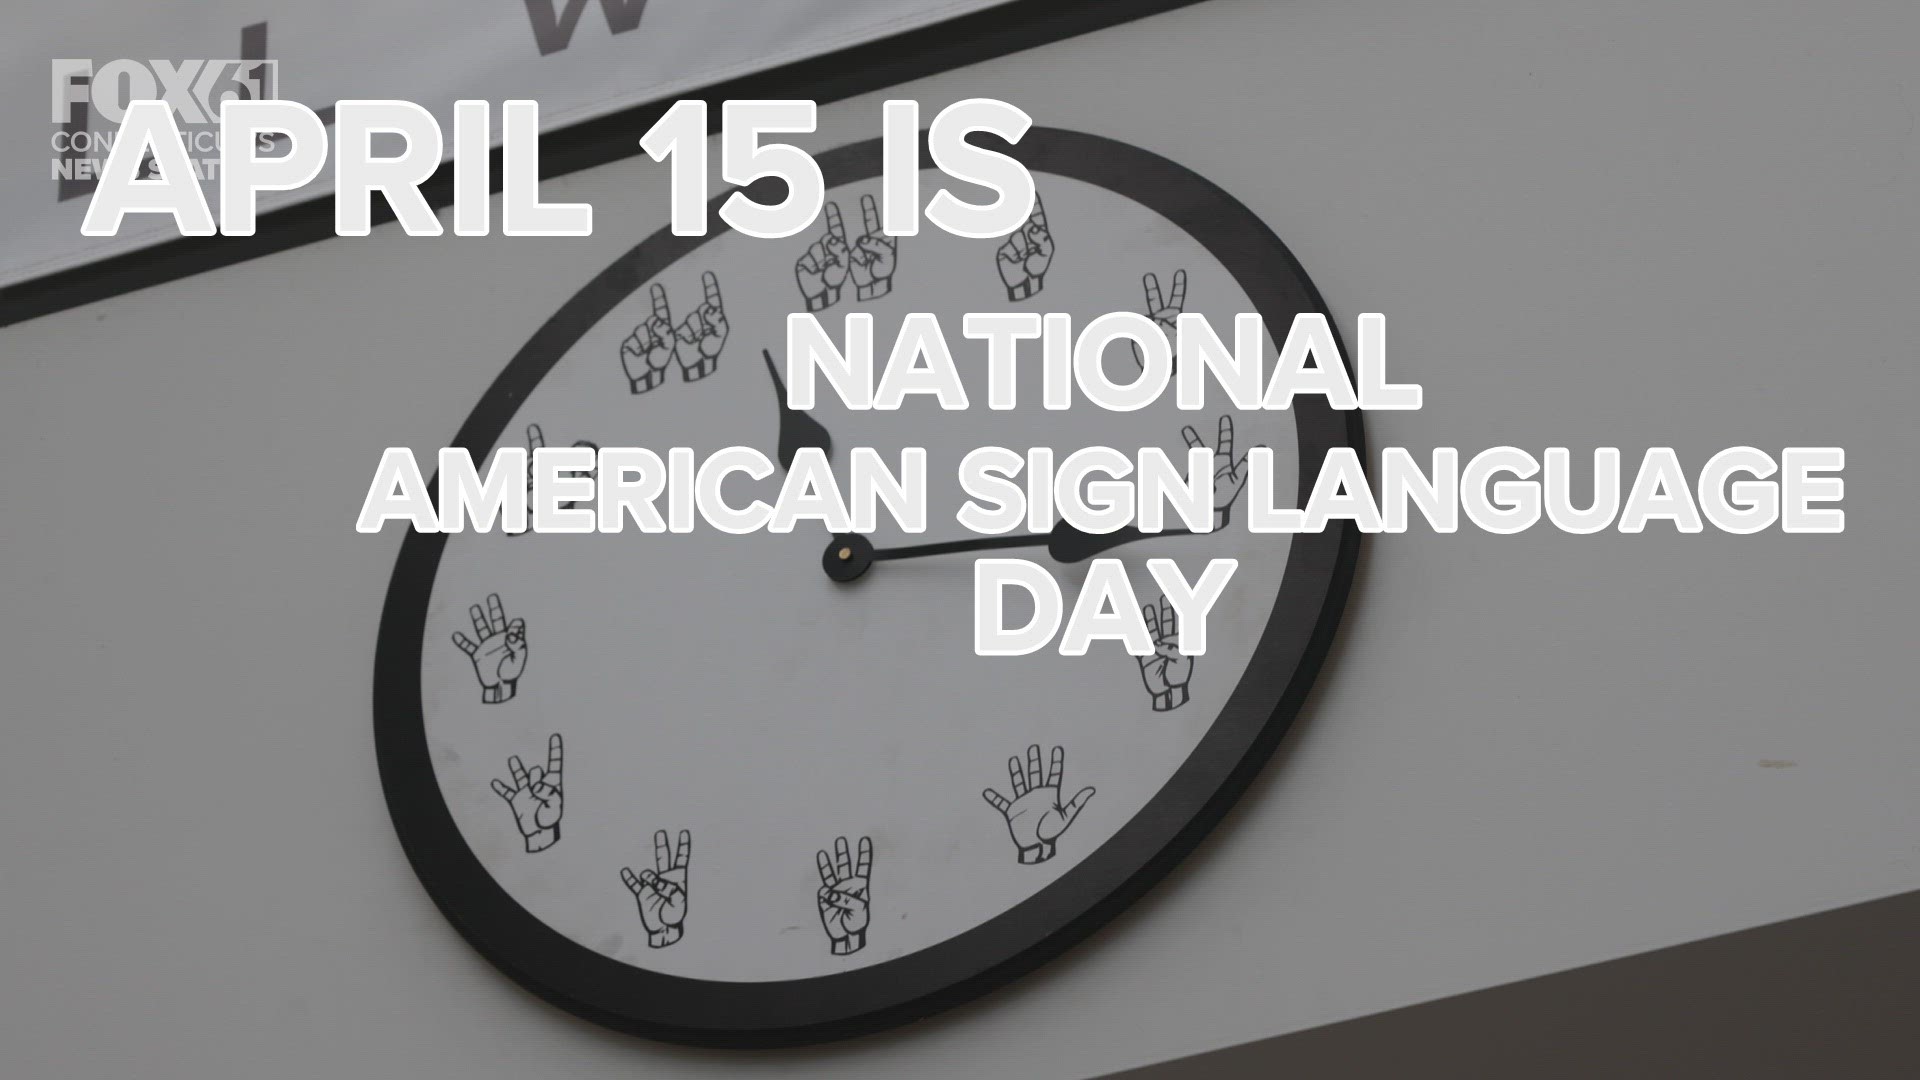 April 15 is National American Sign Language Day. We spoke to members of the American School for the Deaf in CT, who shared their experiences communicating in ASL.